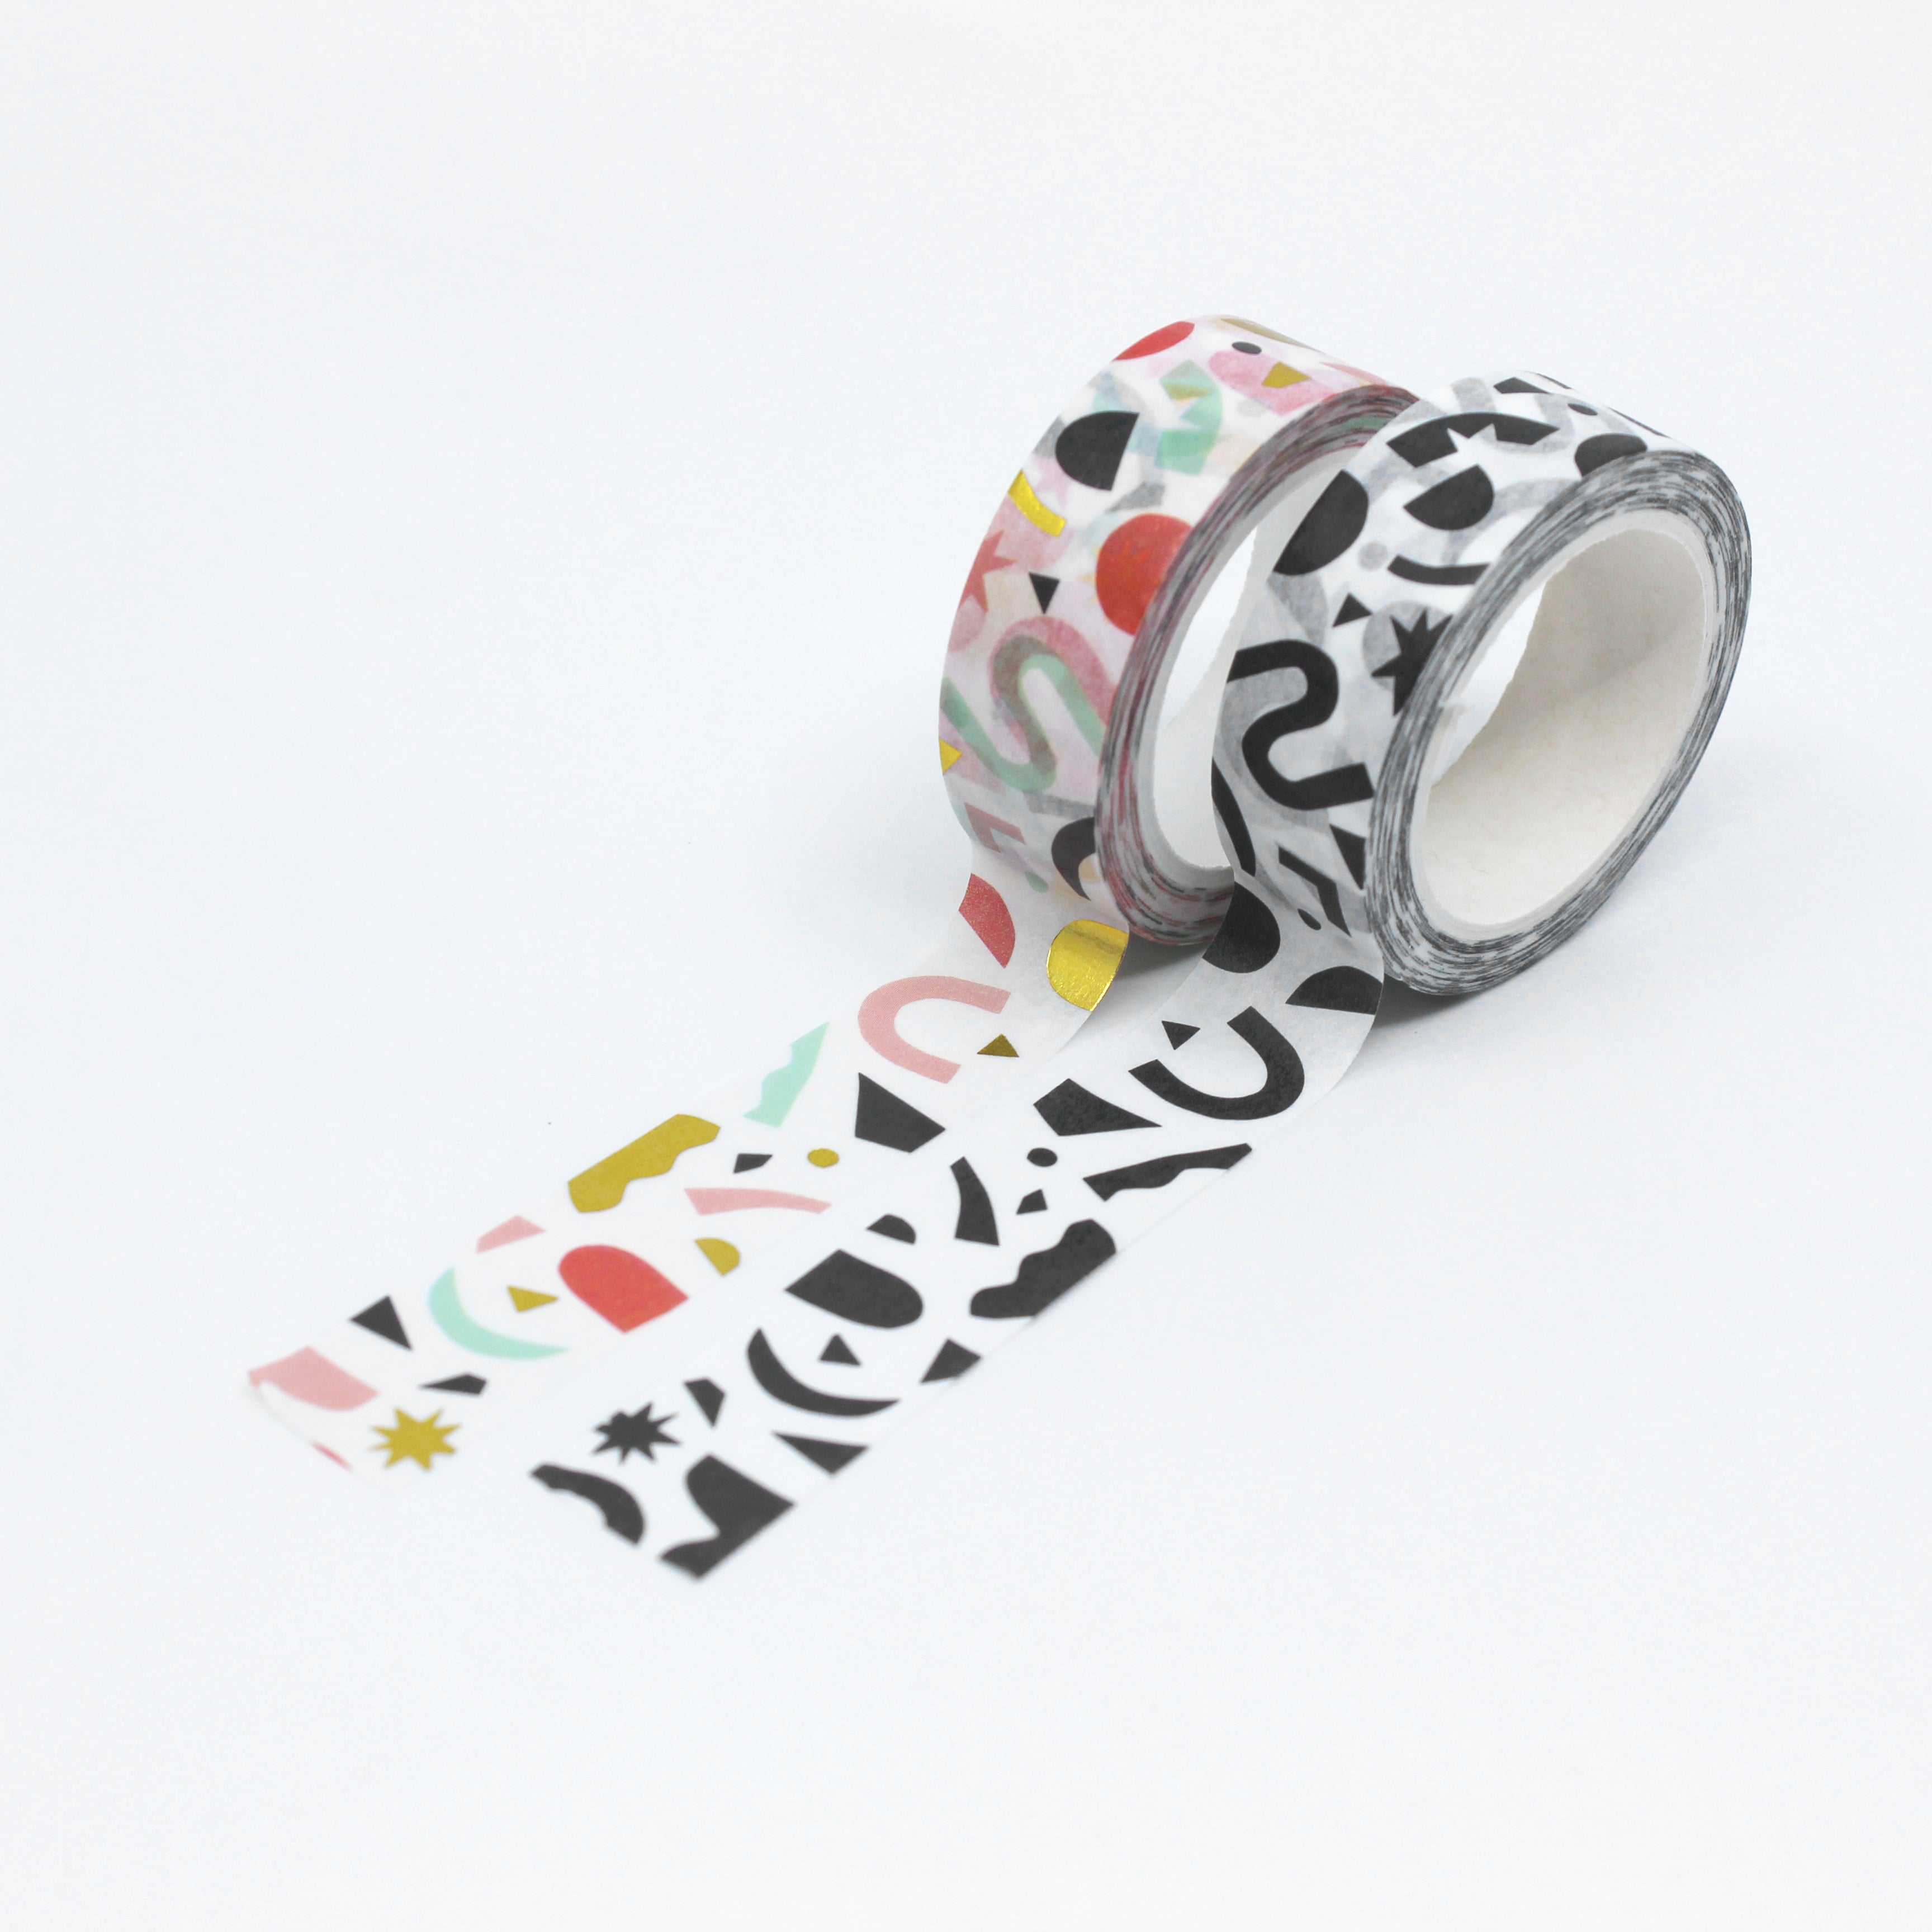 This is a photo of worthwhile papers brand washi tapes in the colorful geometric shapes pattern and in the black and white pattern from bbb supplies.